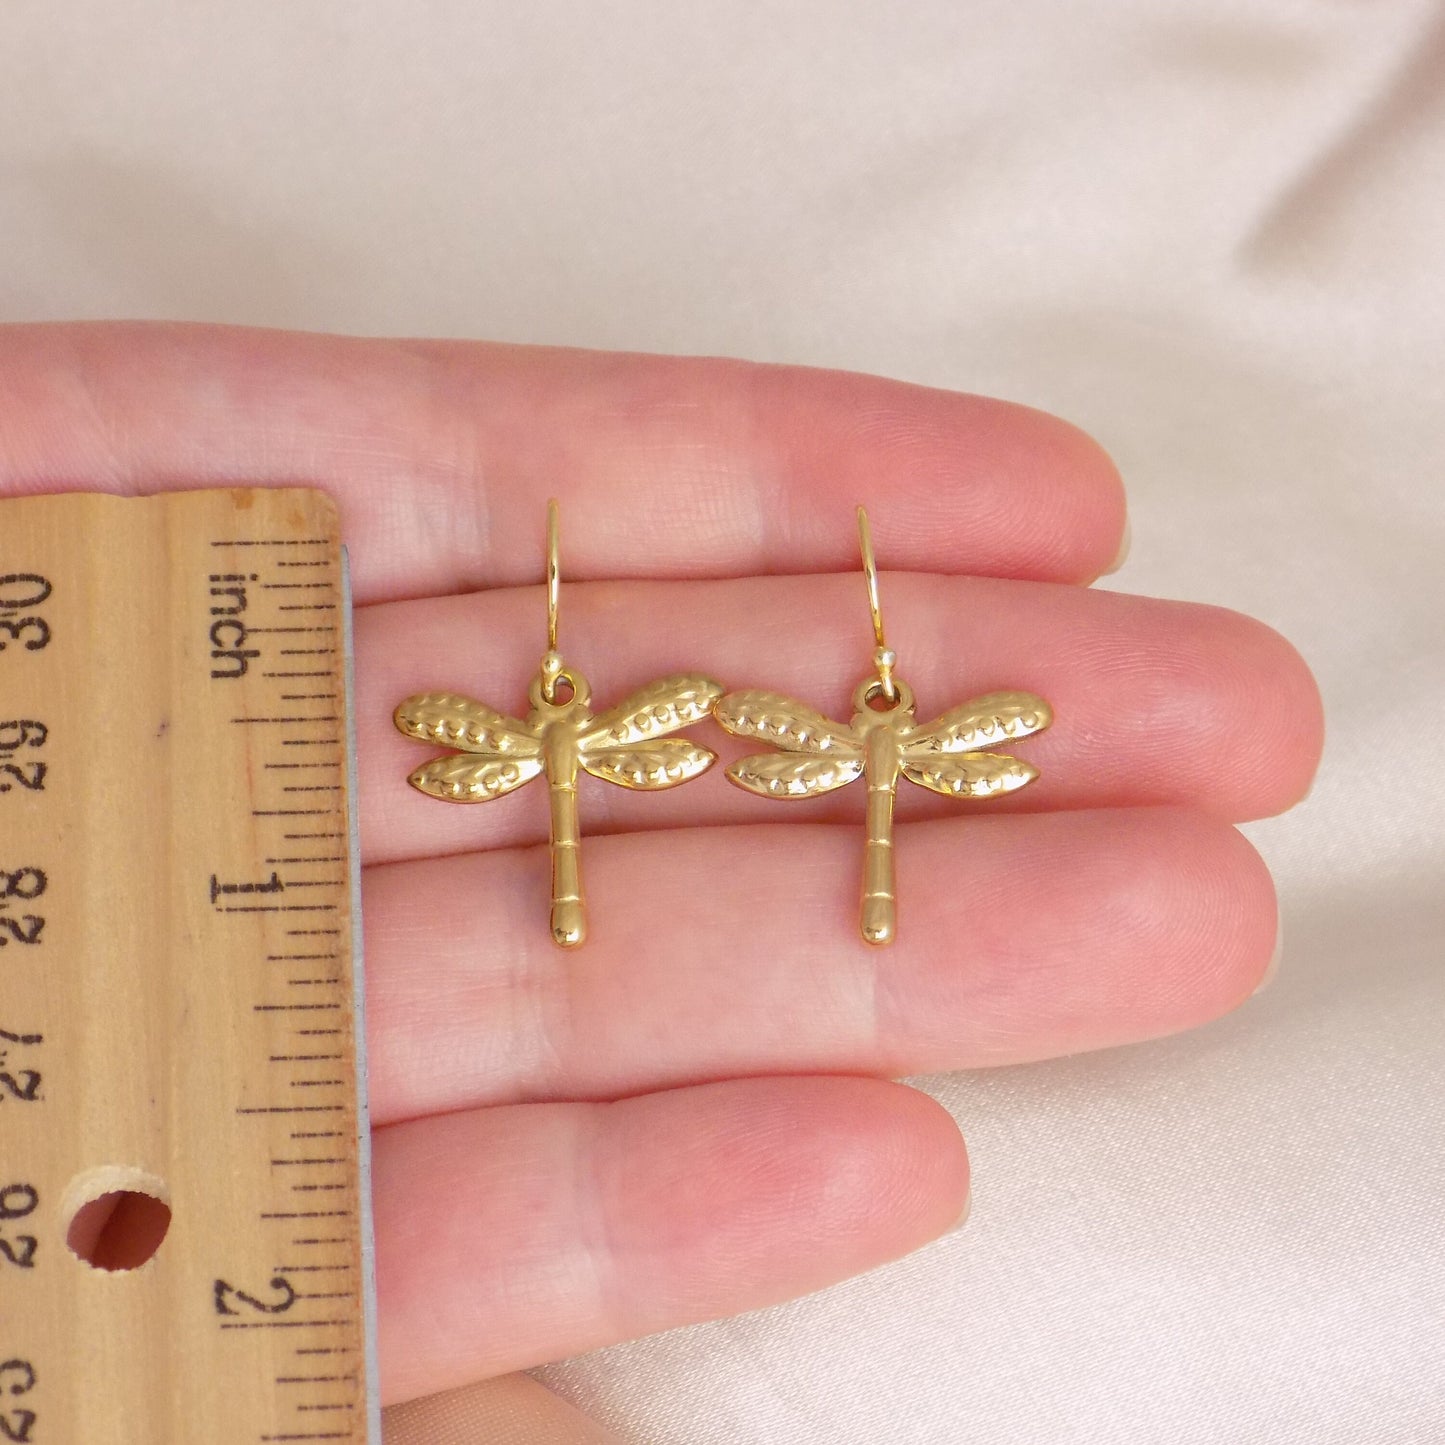 Dragonfly Earrings Gold, Charm Dangle Earring, Unique Jewelry, Gift For Her, M7-331